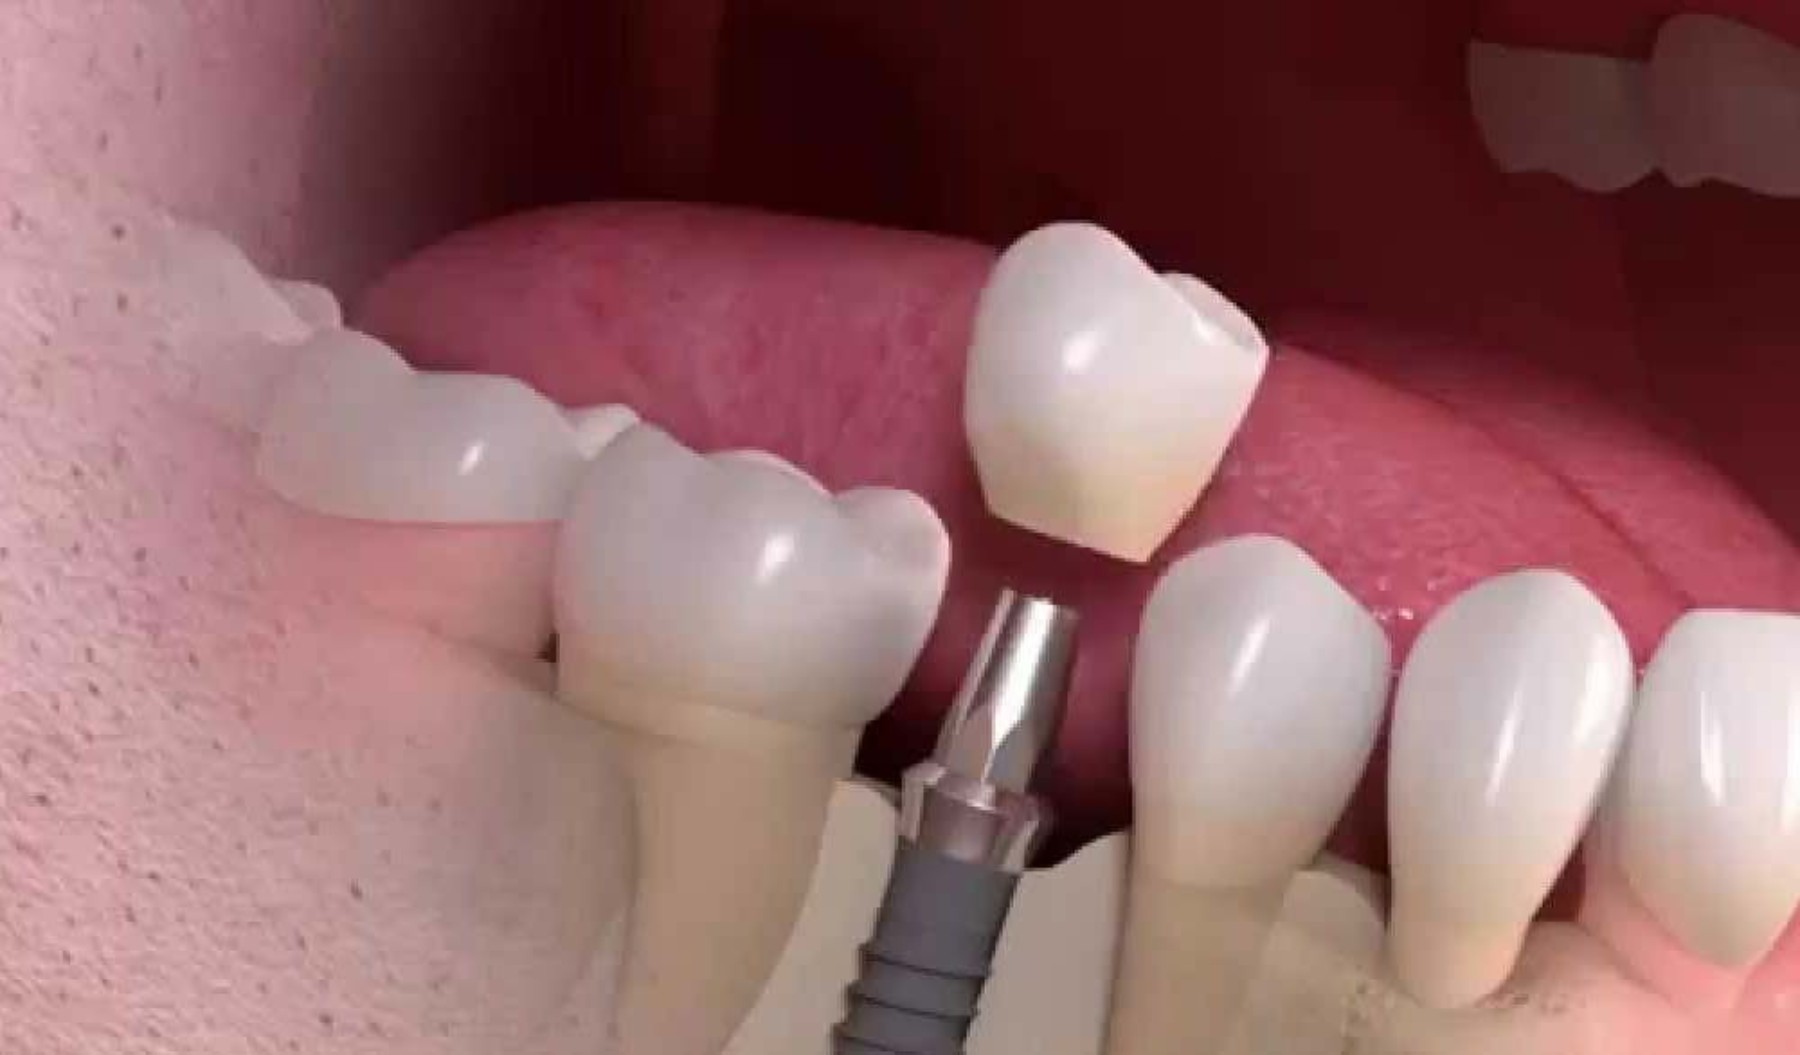 Temporary Tooth Filling: Is It Effective?